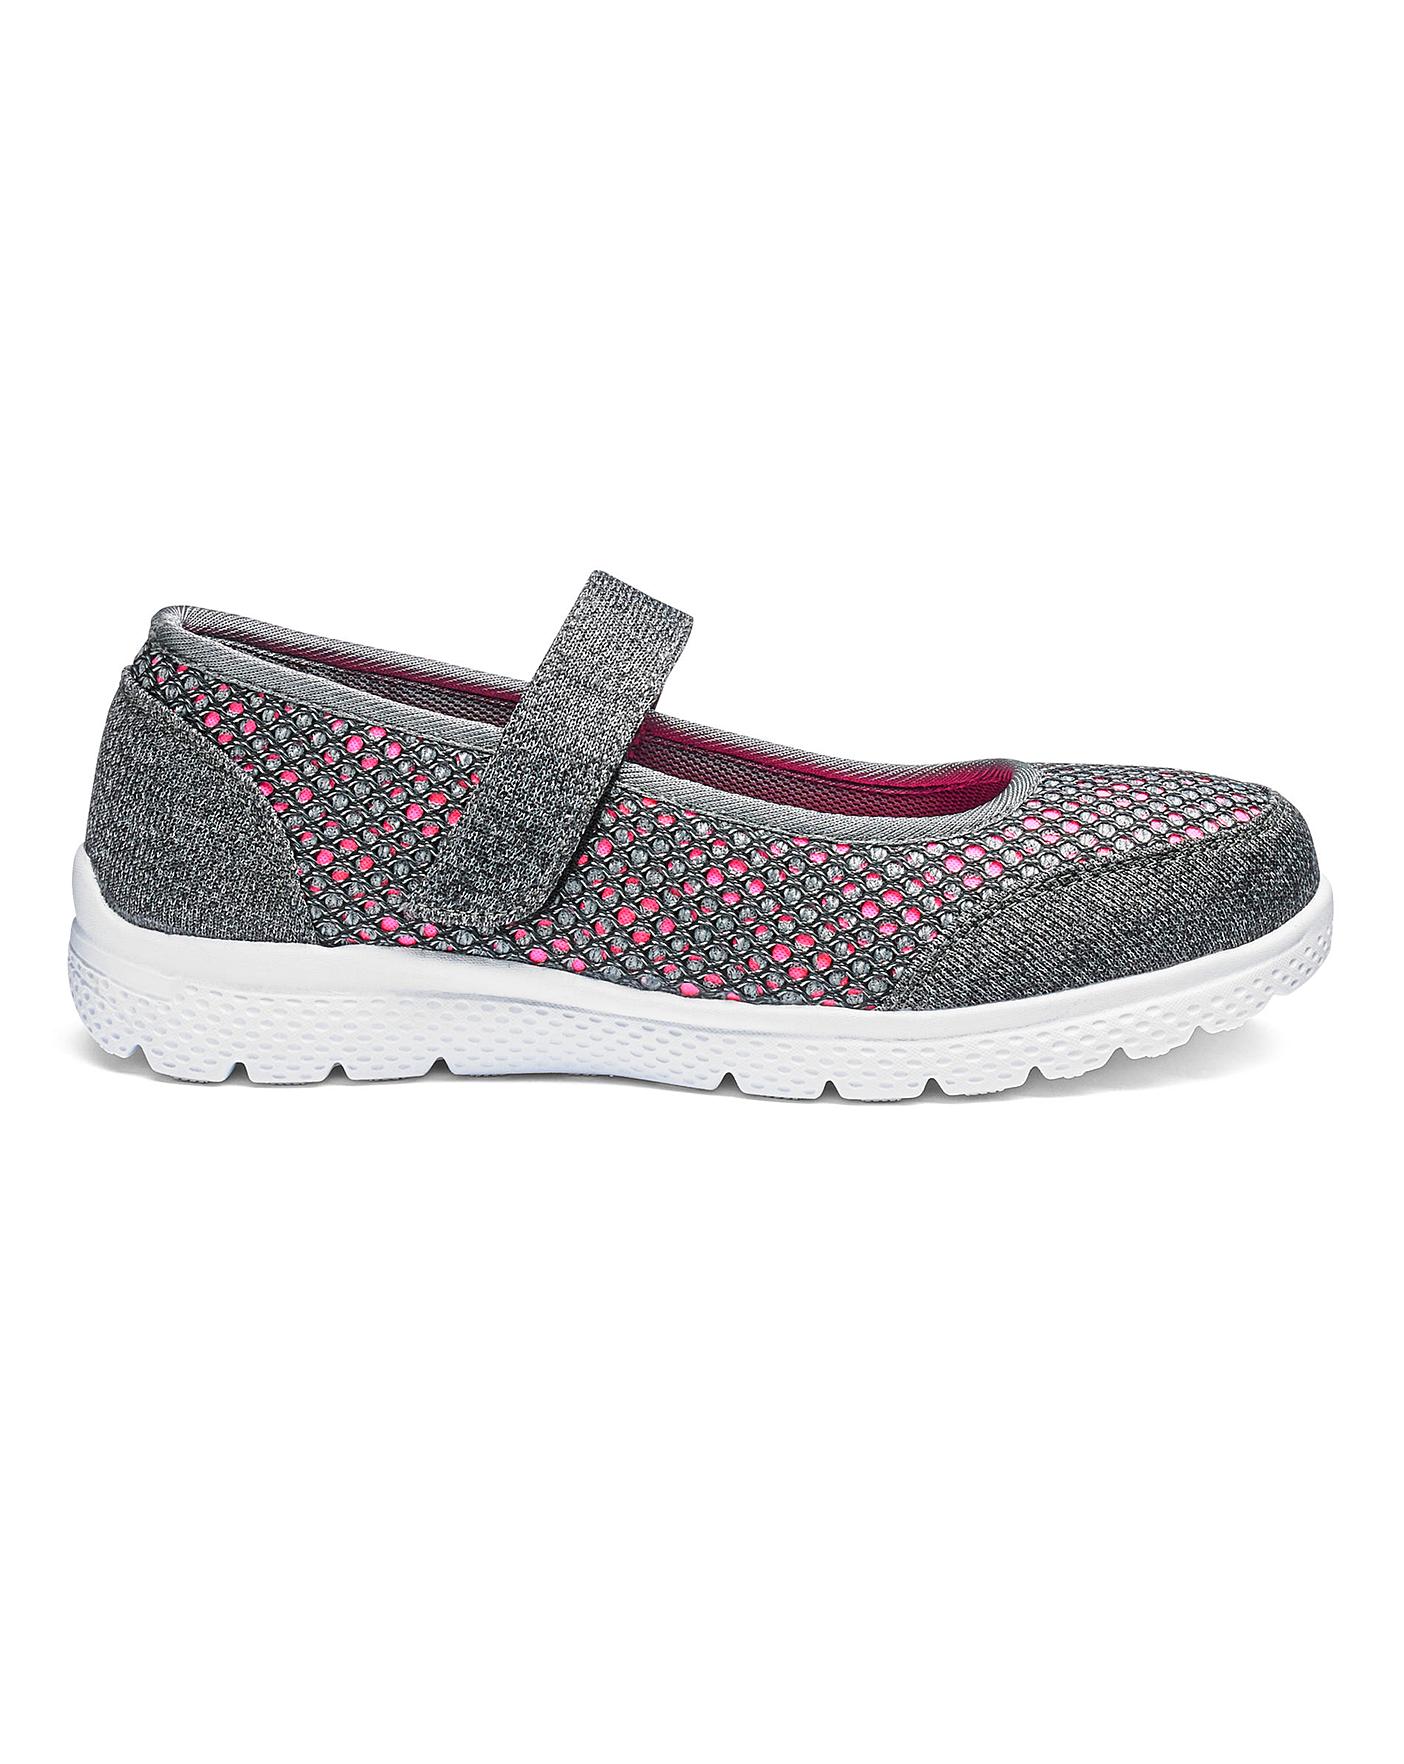 Cushion Walk Leisure Shoes EEE Fit 